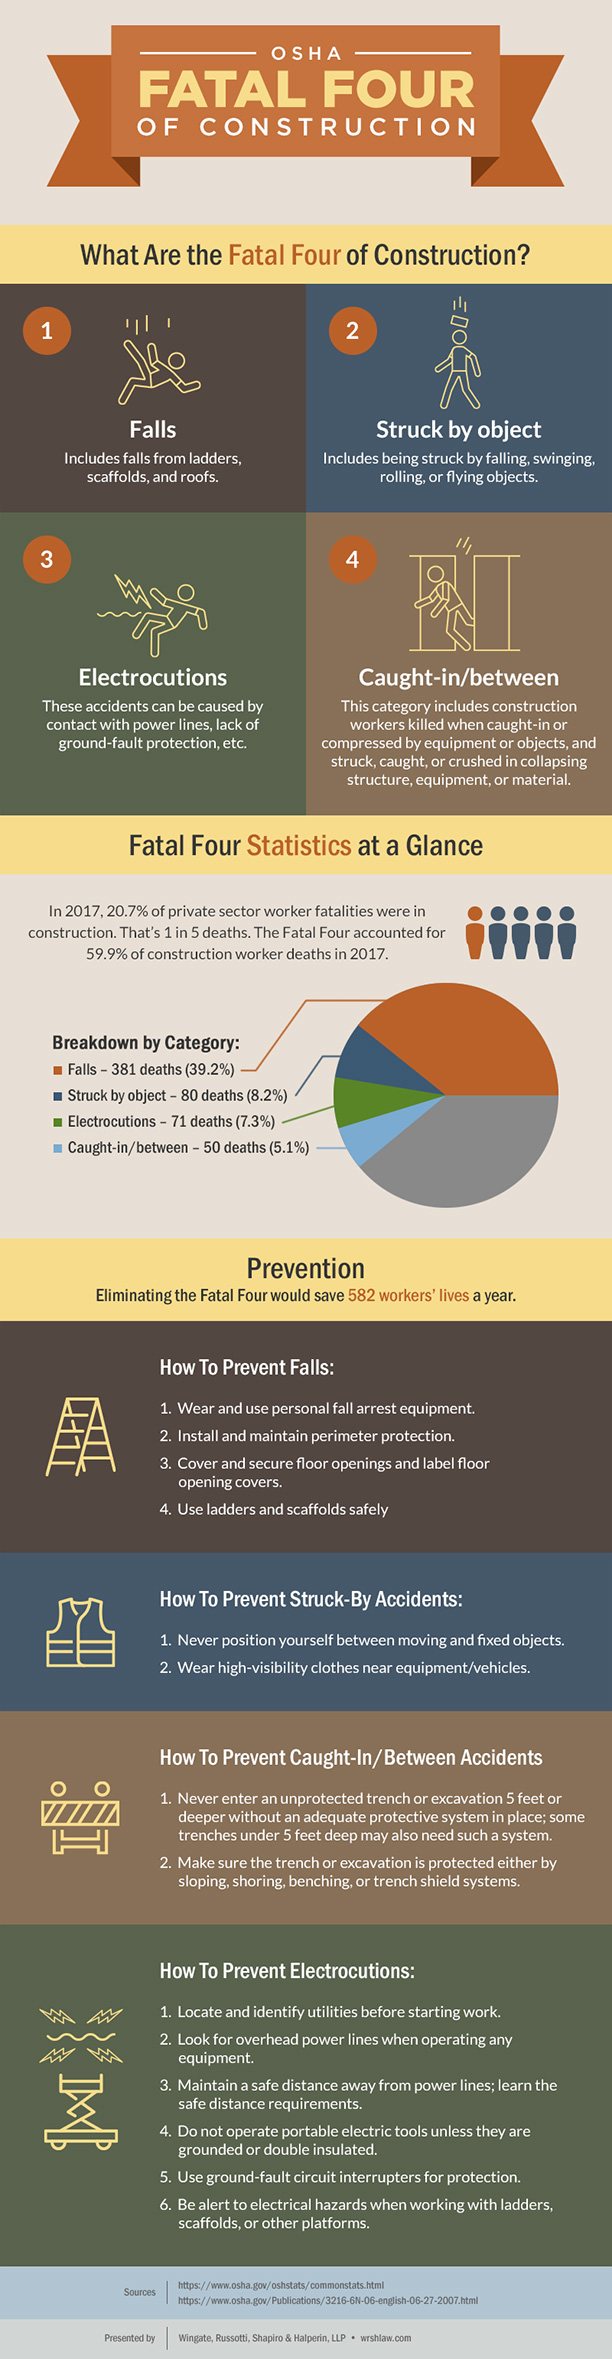 WRSH Presents: Fatal Four Construction Accidents Infographic